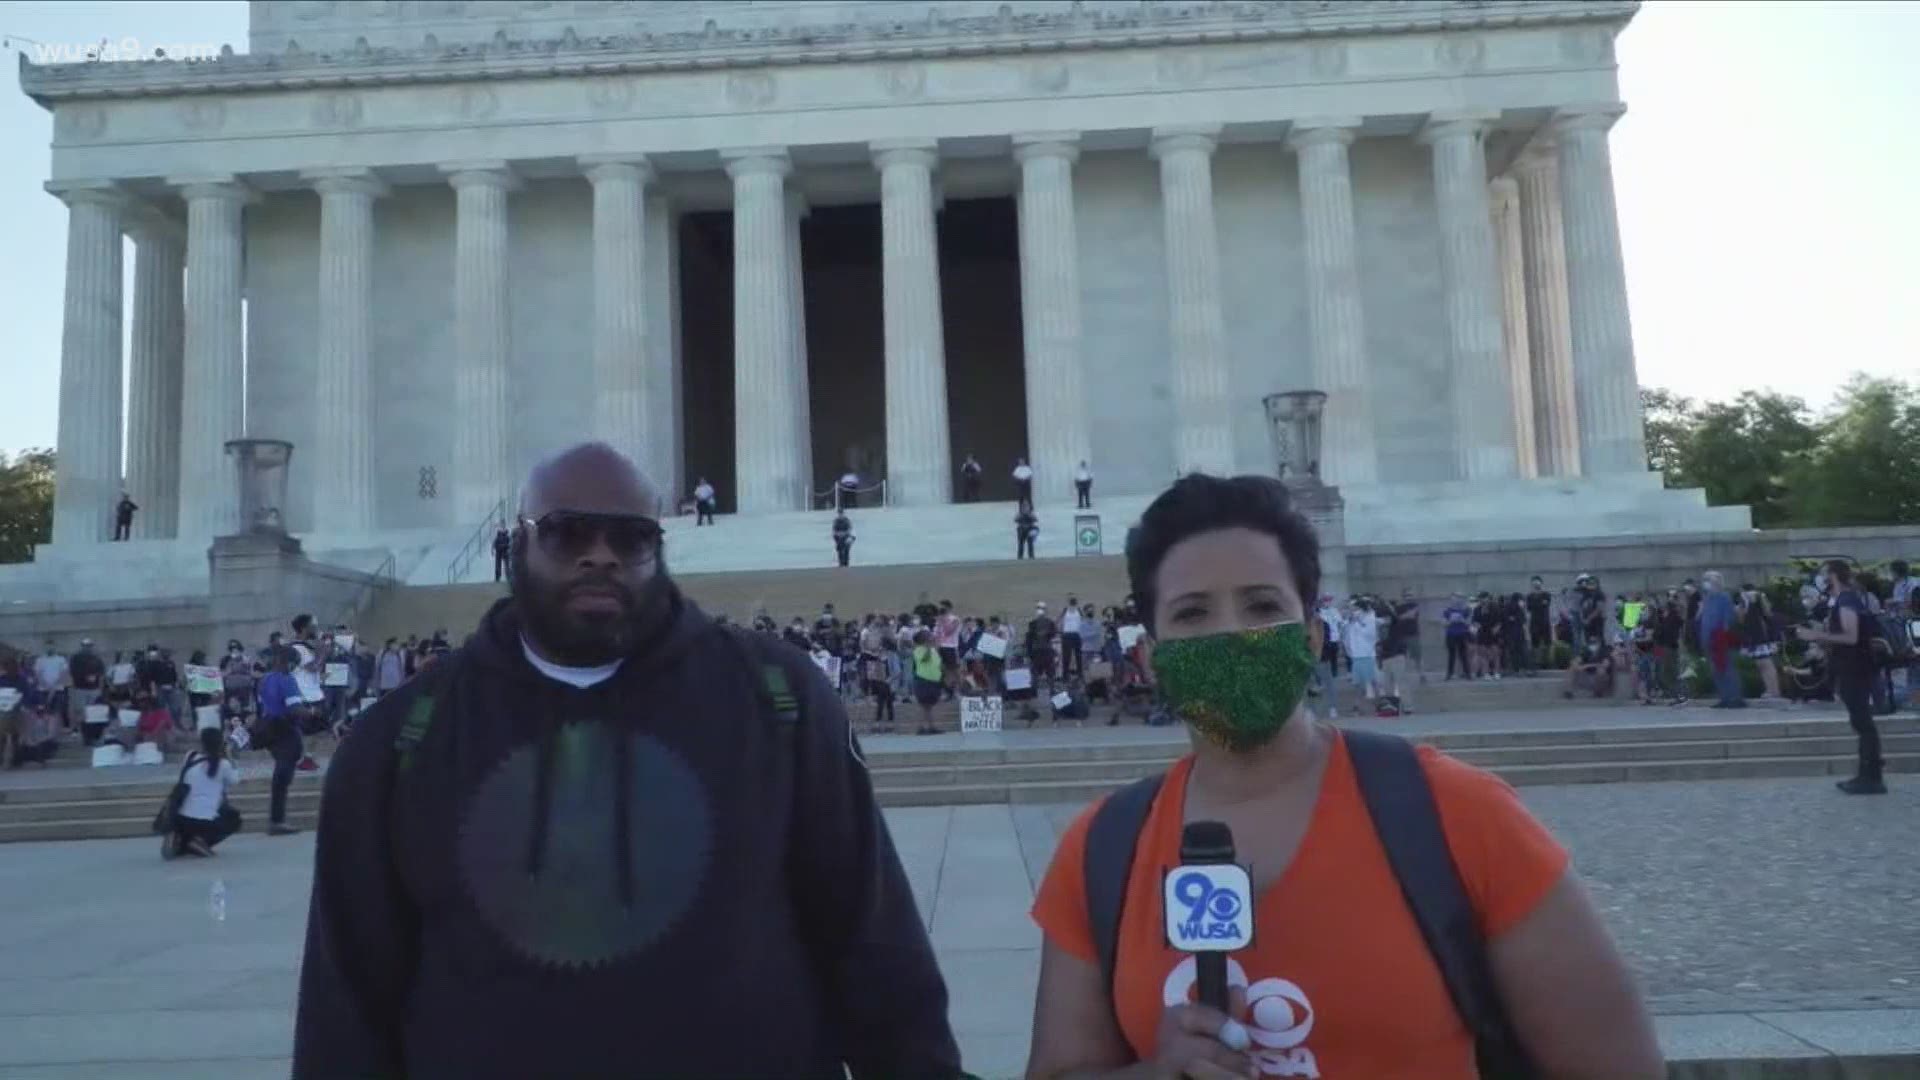 Nearly 200 demonstrators marched up the steps of the Lincoln Memorial chanting the name of George Floyd.